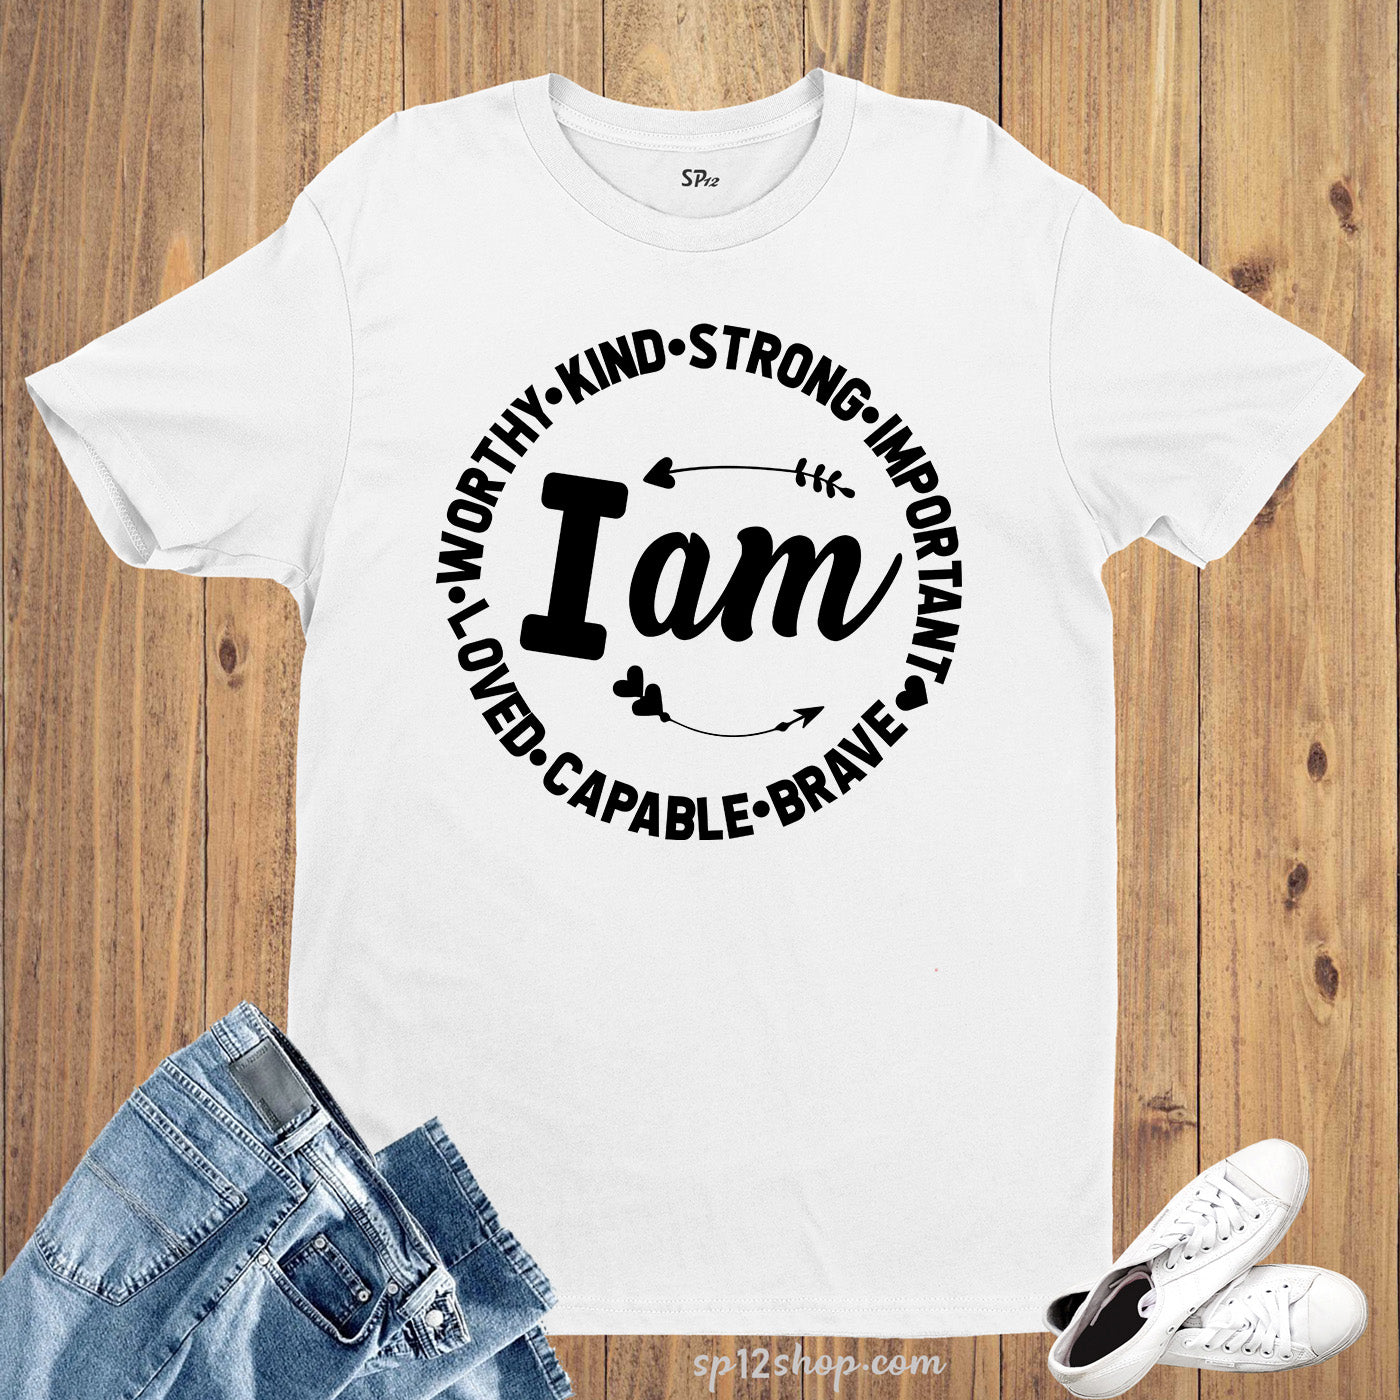 I Am Worthy Kind Strong Important Loved Capable Brave T Shirt